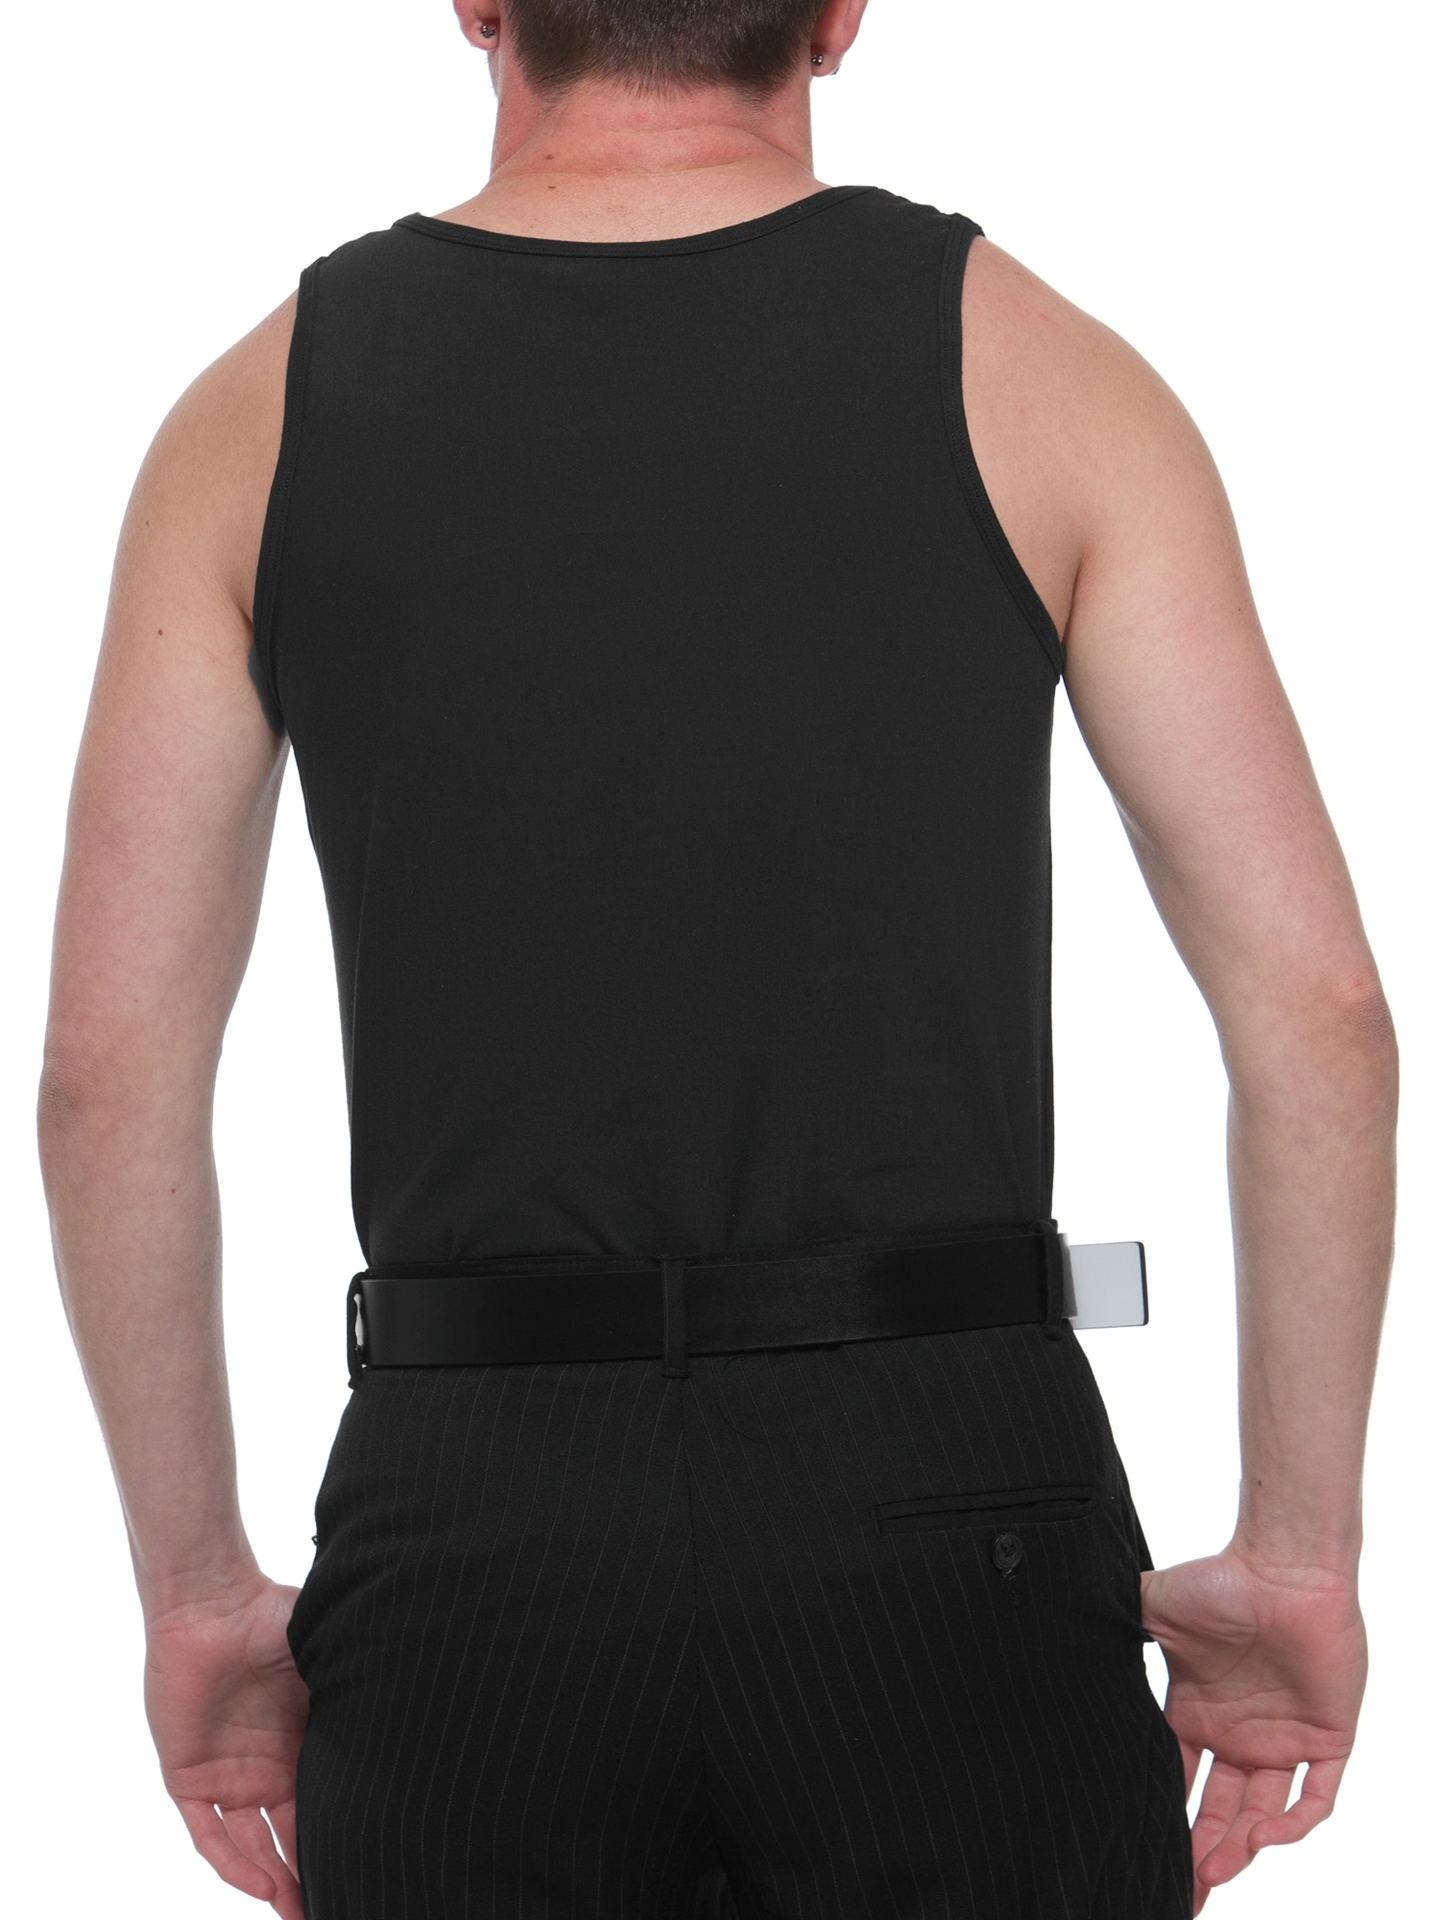 MagiCotton Full Compression Binding Tank. FTM Chest Binders for Trans Men  by Underworks